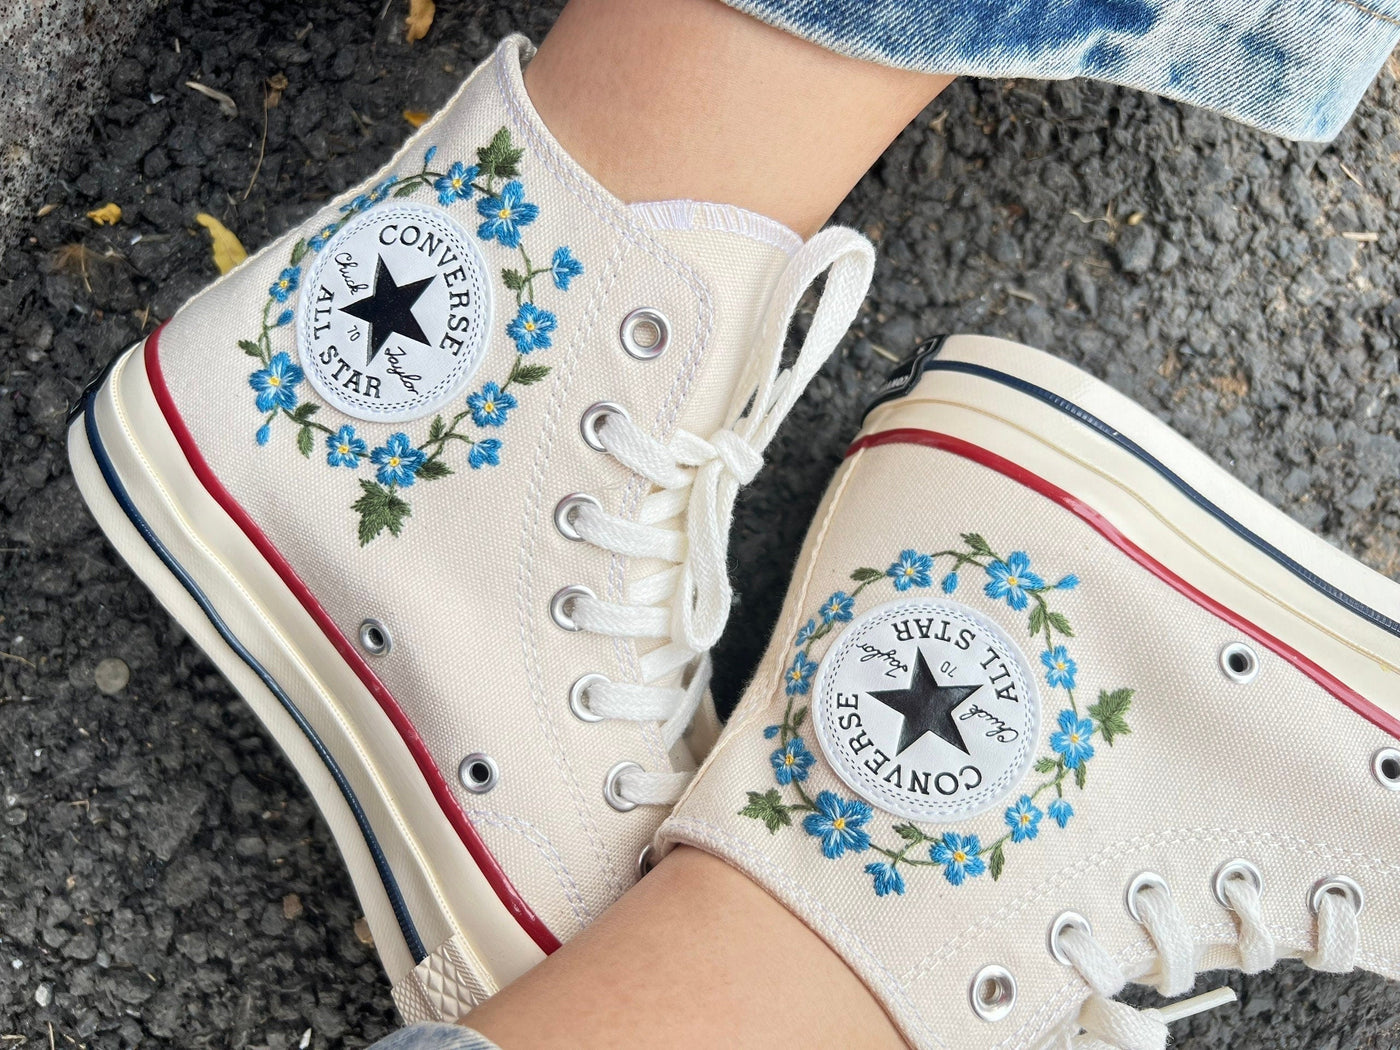 Embroidered Converse,Converse High Tops,Embroidered Blue Flower